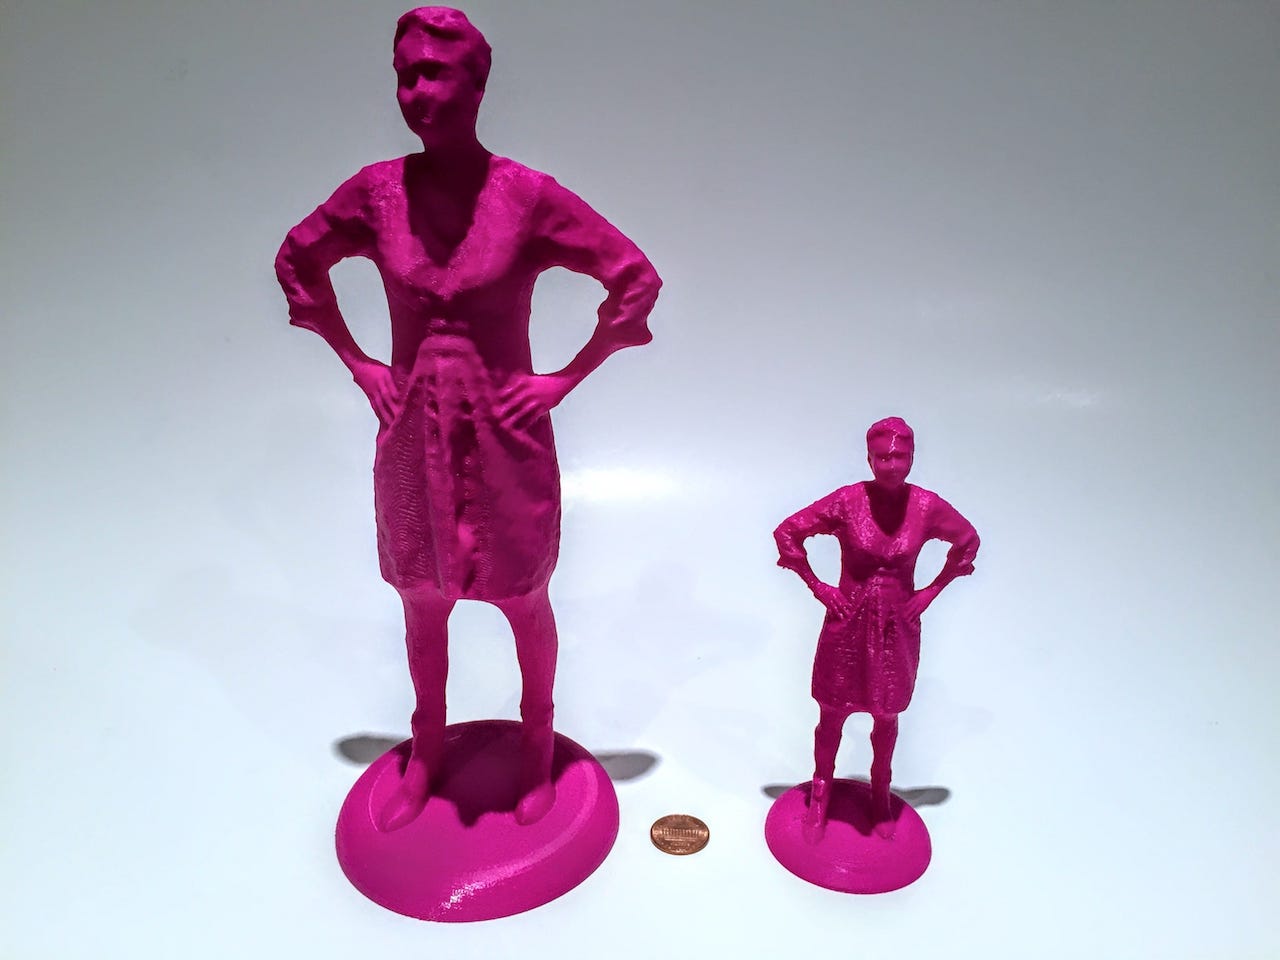  Two sizes of a 3D printed figurine based on a 3D scan of an actual person 